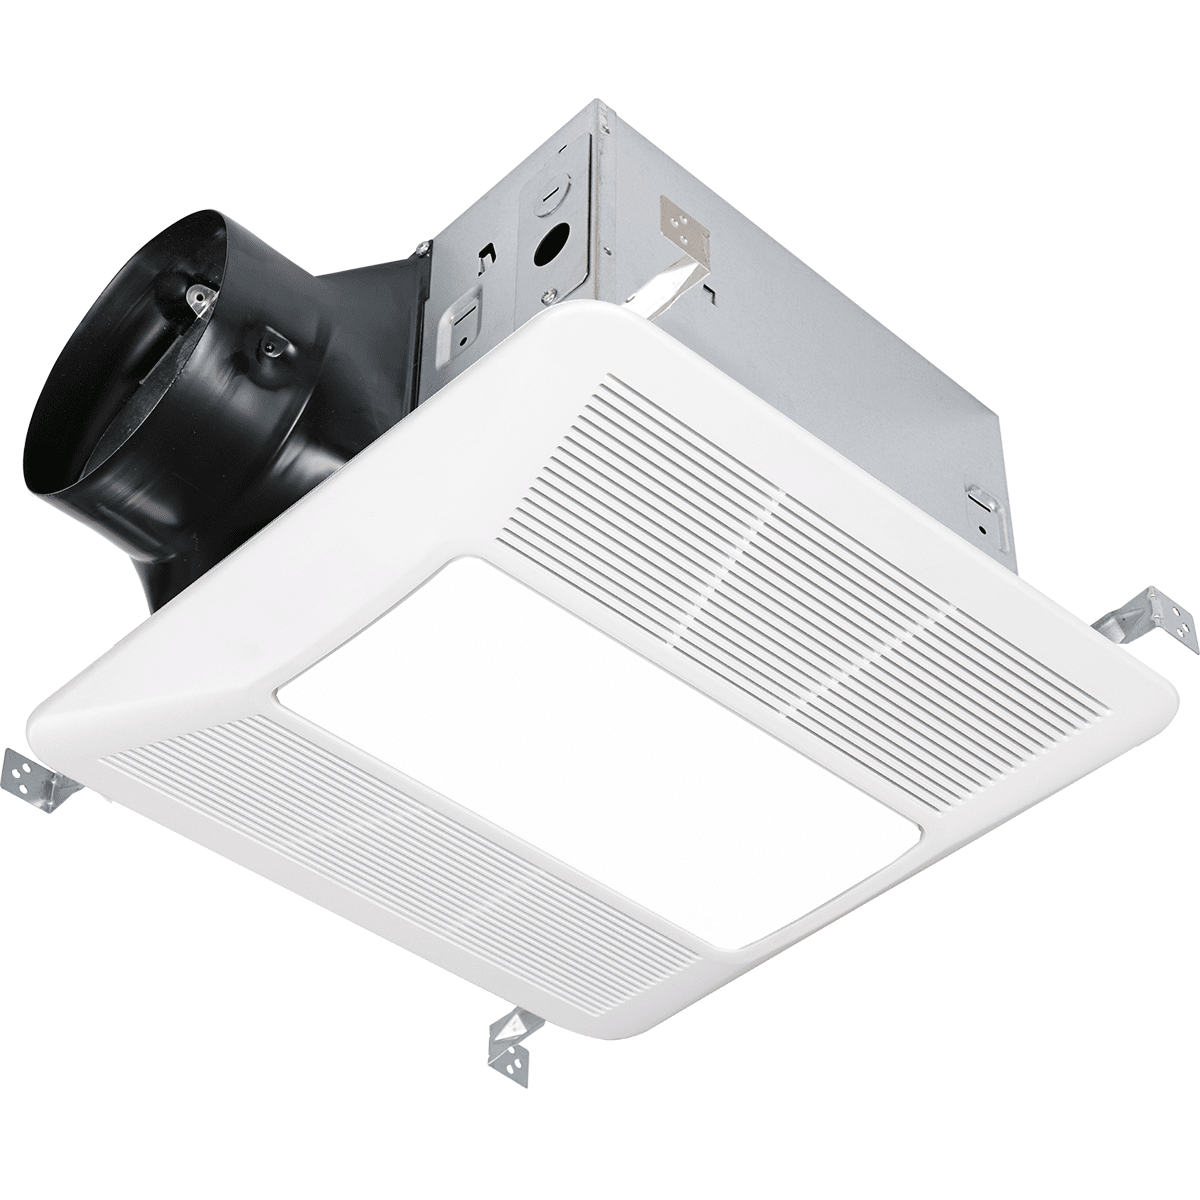 Canarm Flat Panel Light Kit for CEP Series Ceiling Exhaust Fans (LED.CEP)